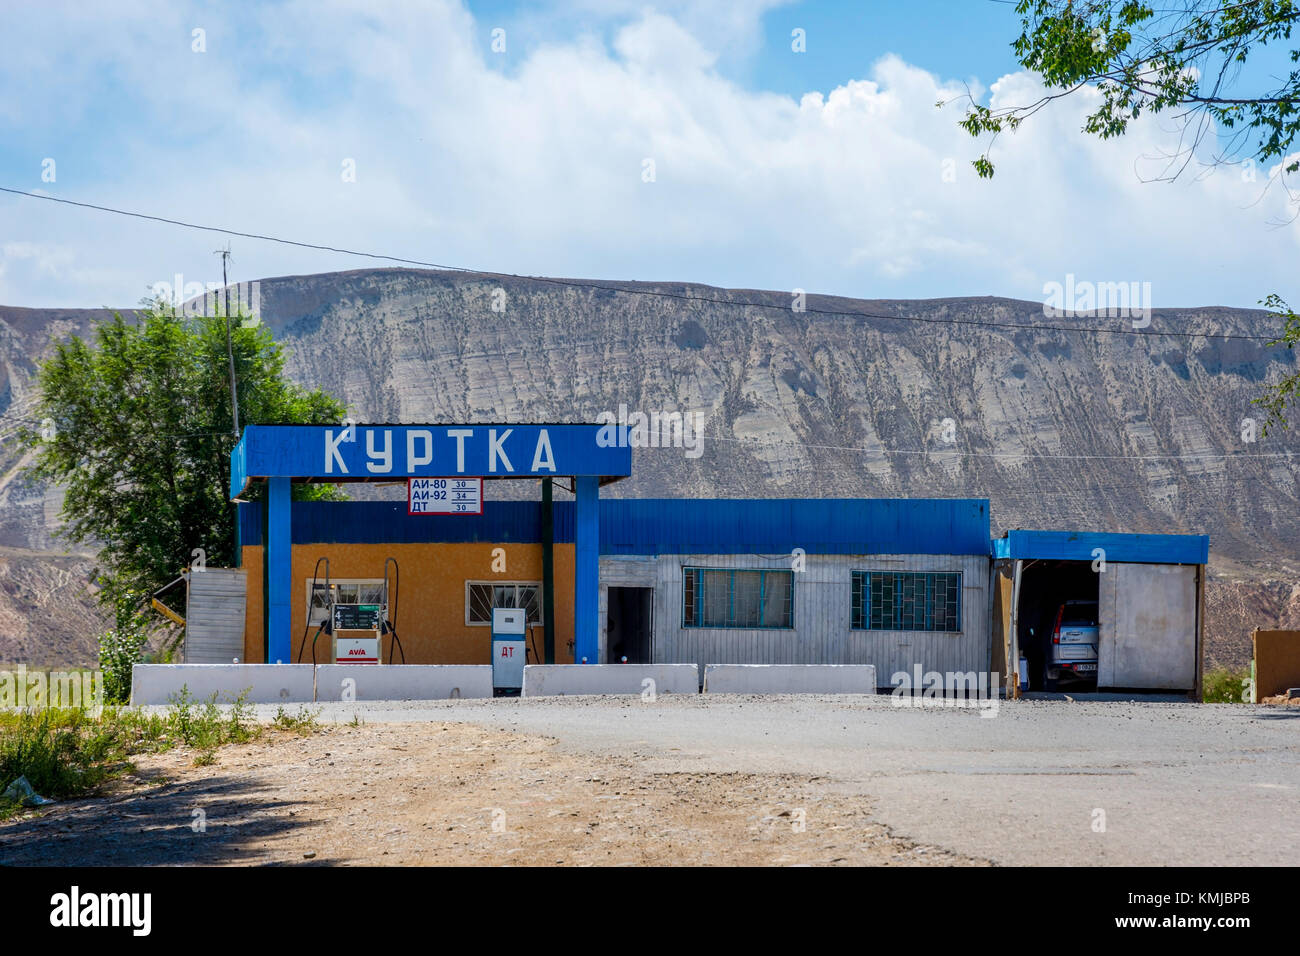 AK-TAL, KYRGYZSTAN - AUGUST 14: Gas station in a remote kyrgyz village on local road. August 2016 Stock Photo